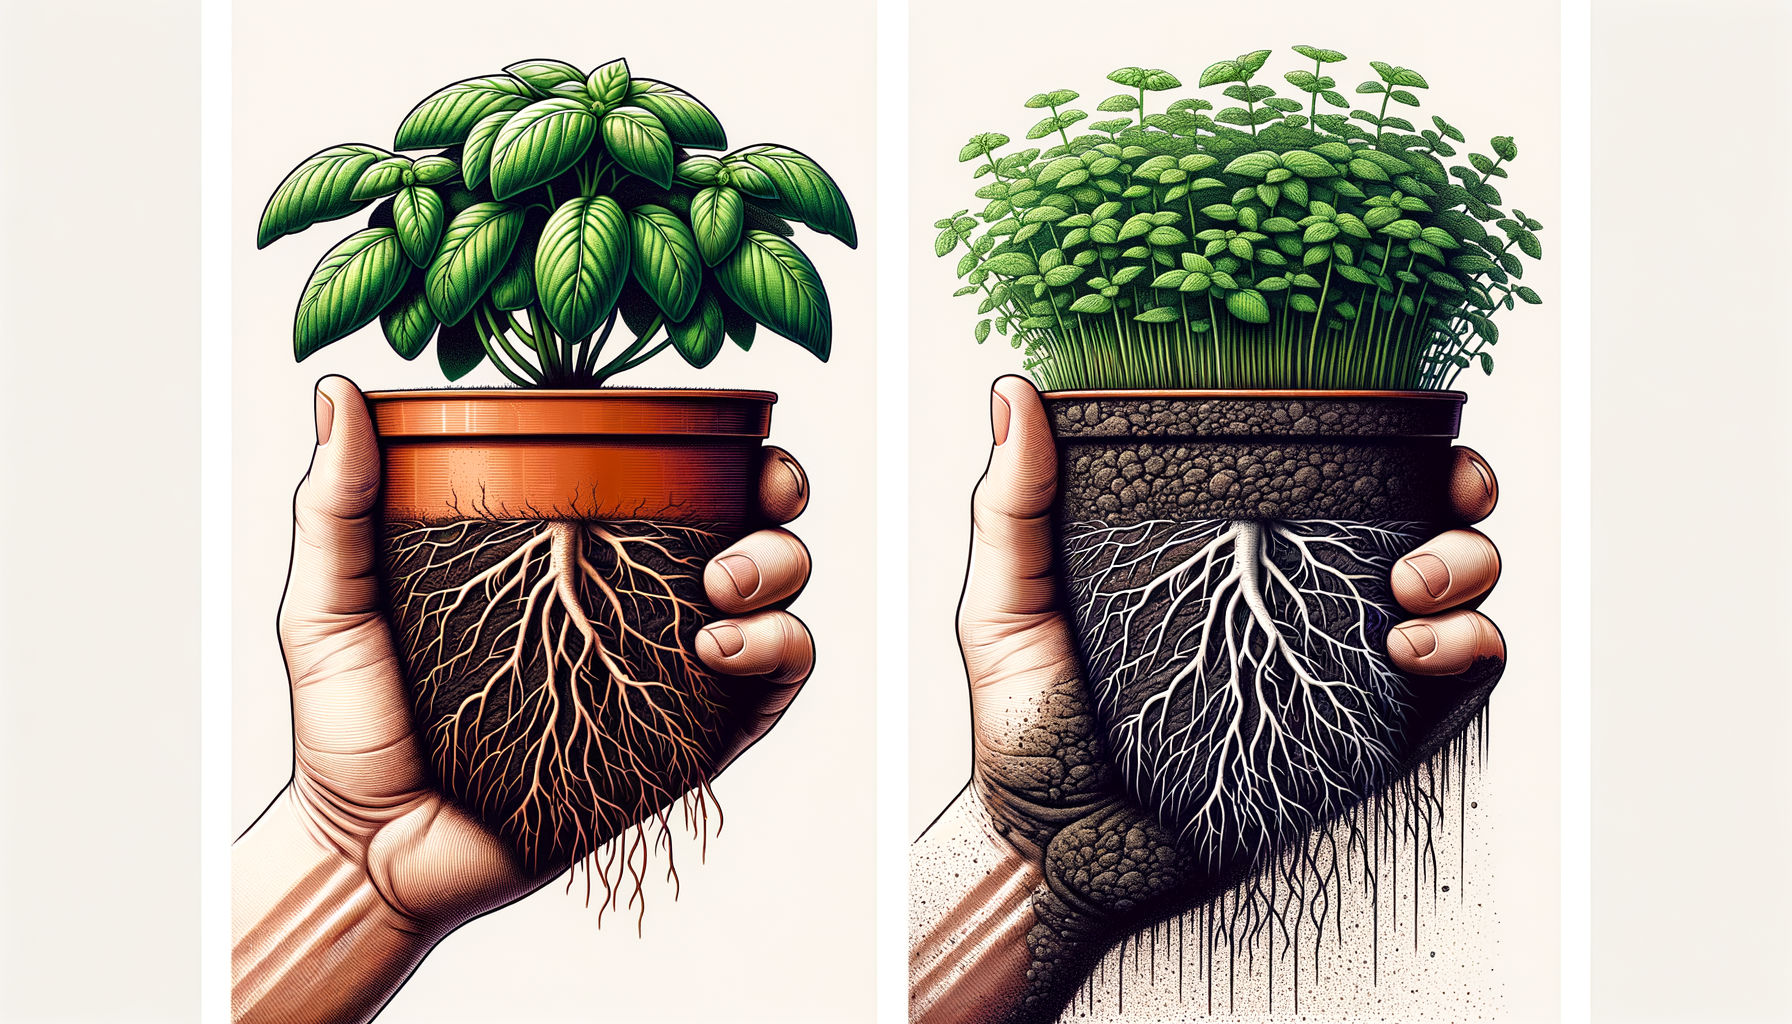 Contrast between healthy and unhealthy potted herb plant